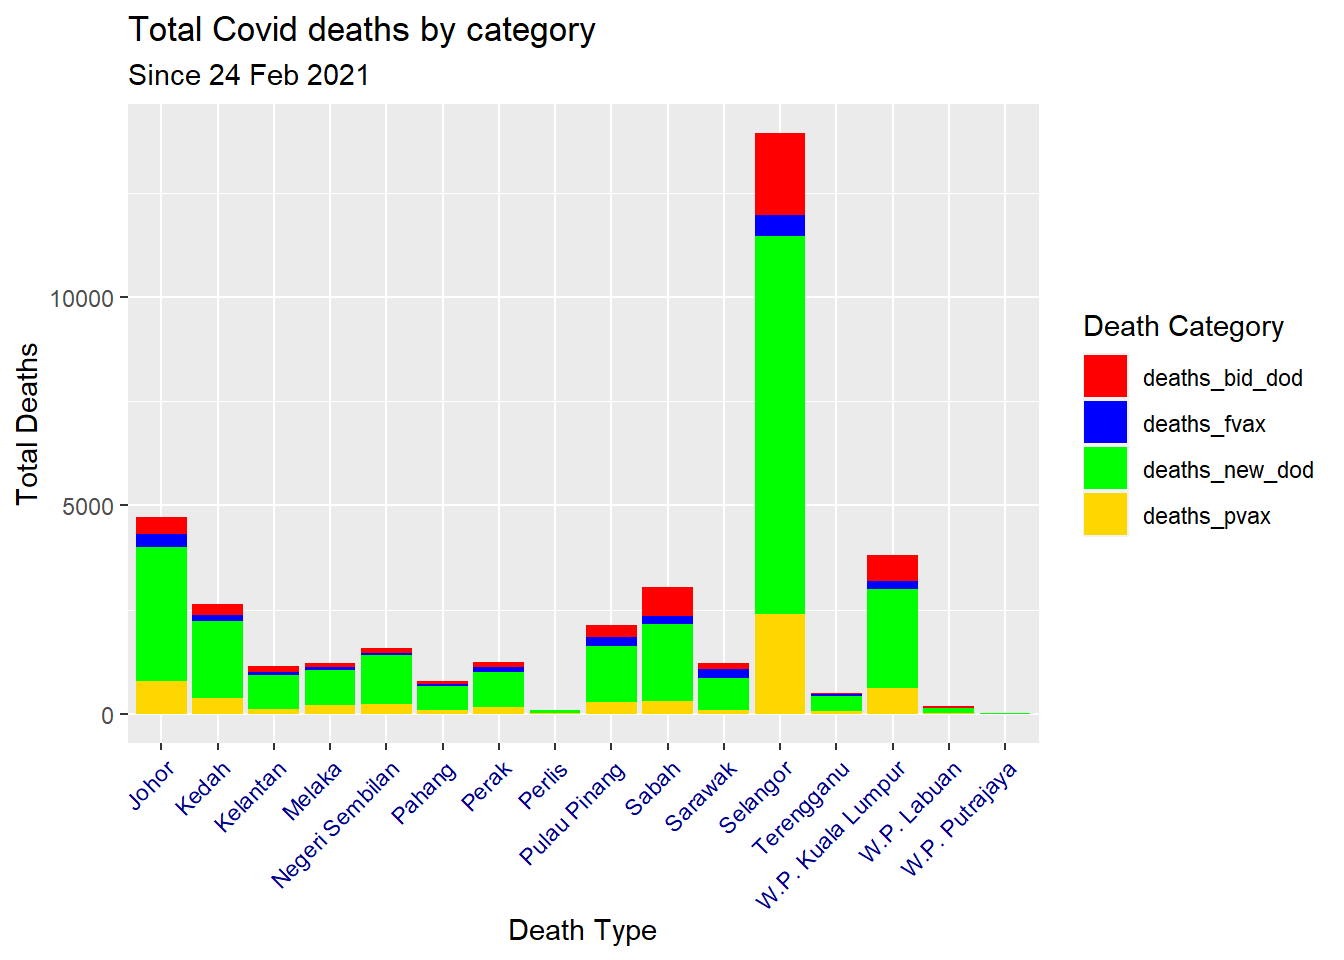 Types of Covid deaths for all states